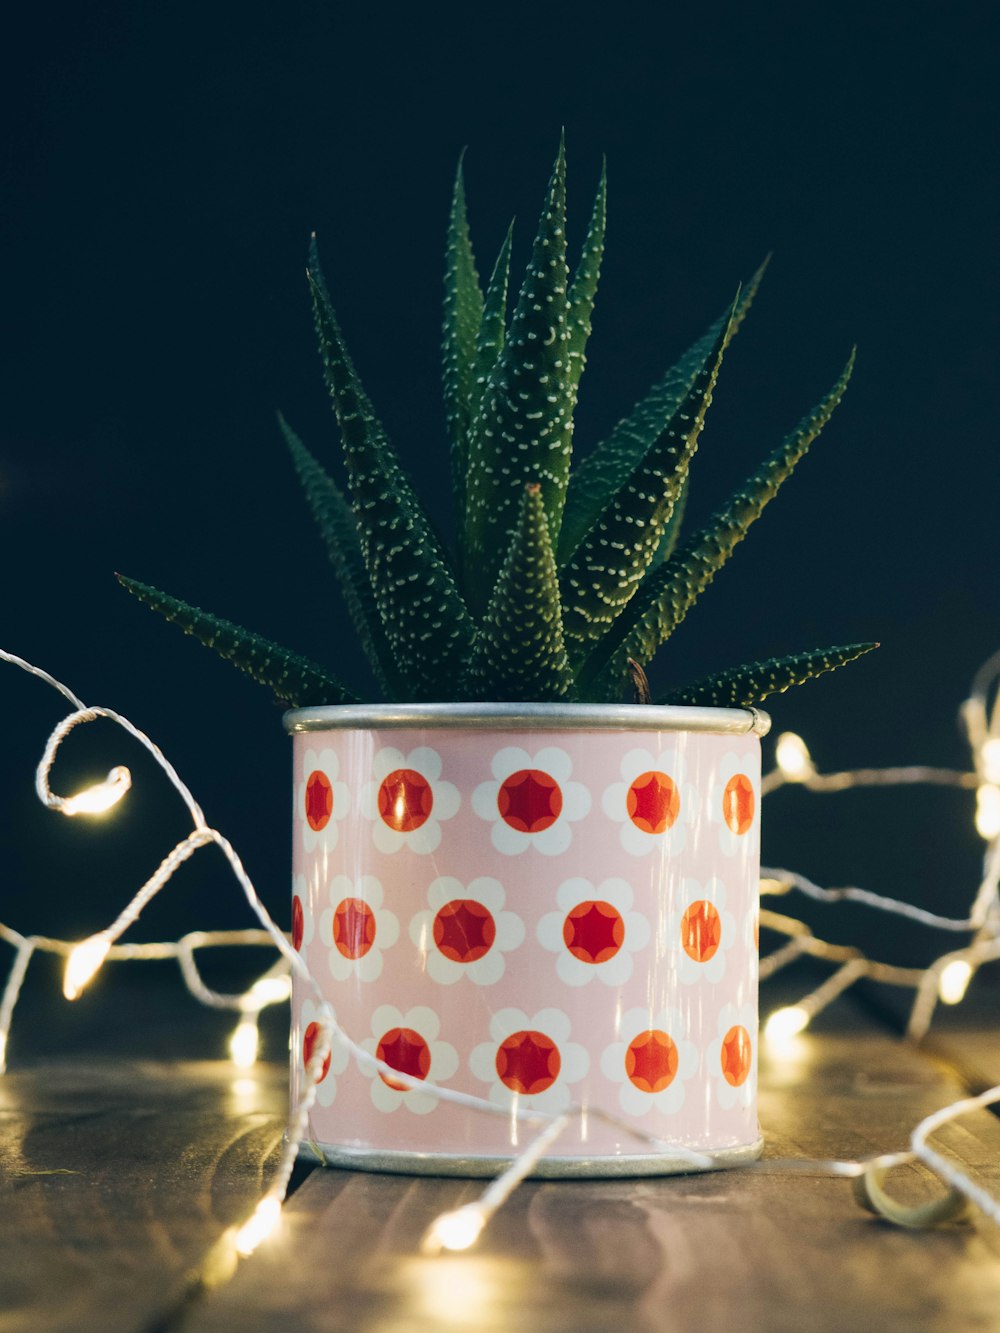 green plant in white and red ceramic mug